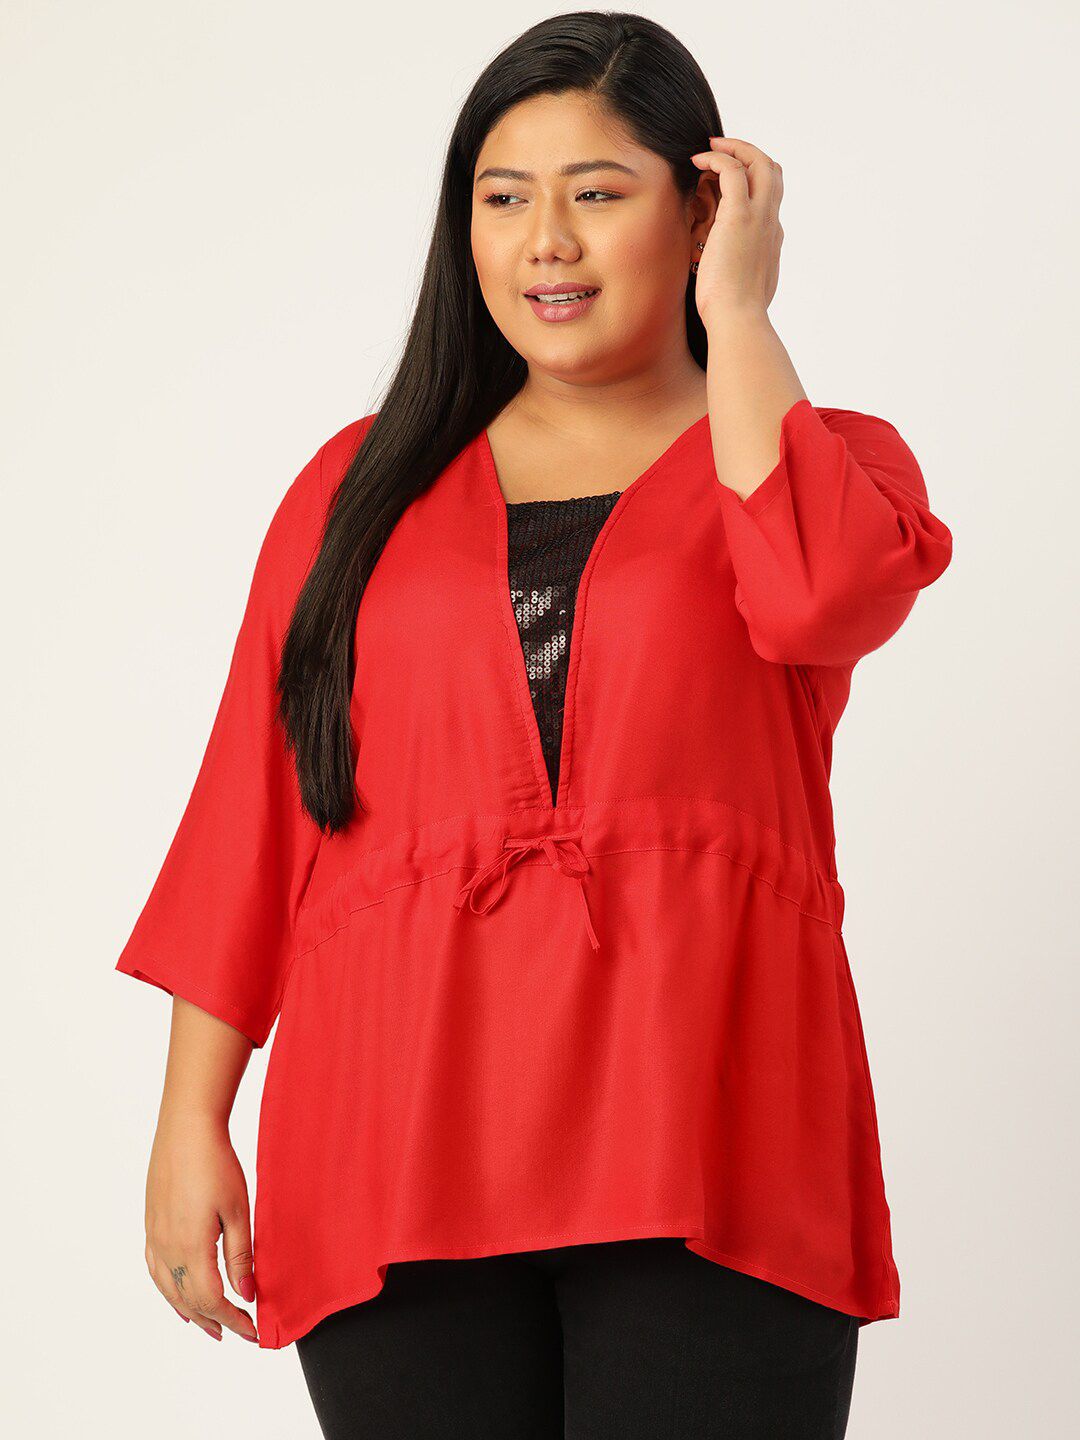 theRebelinme Plus Size Red Sequin Top Price in India